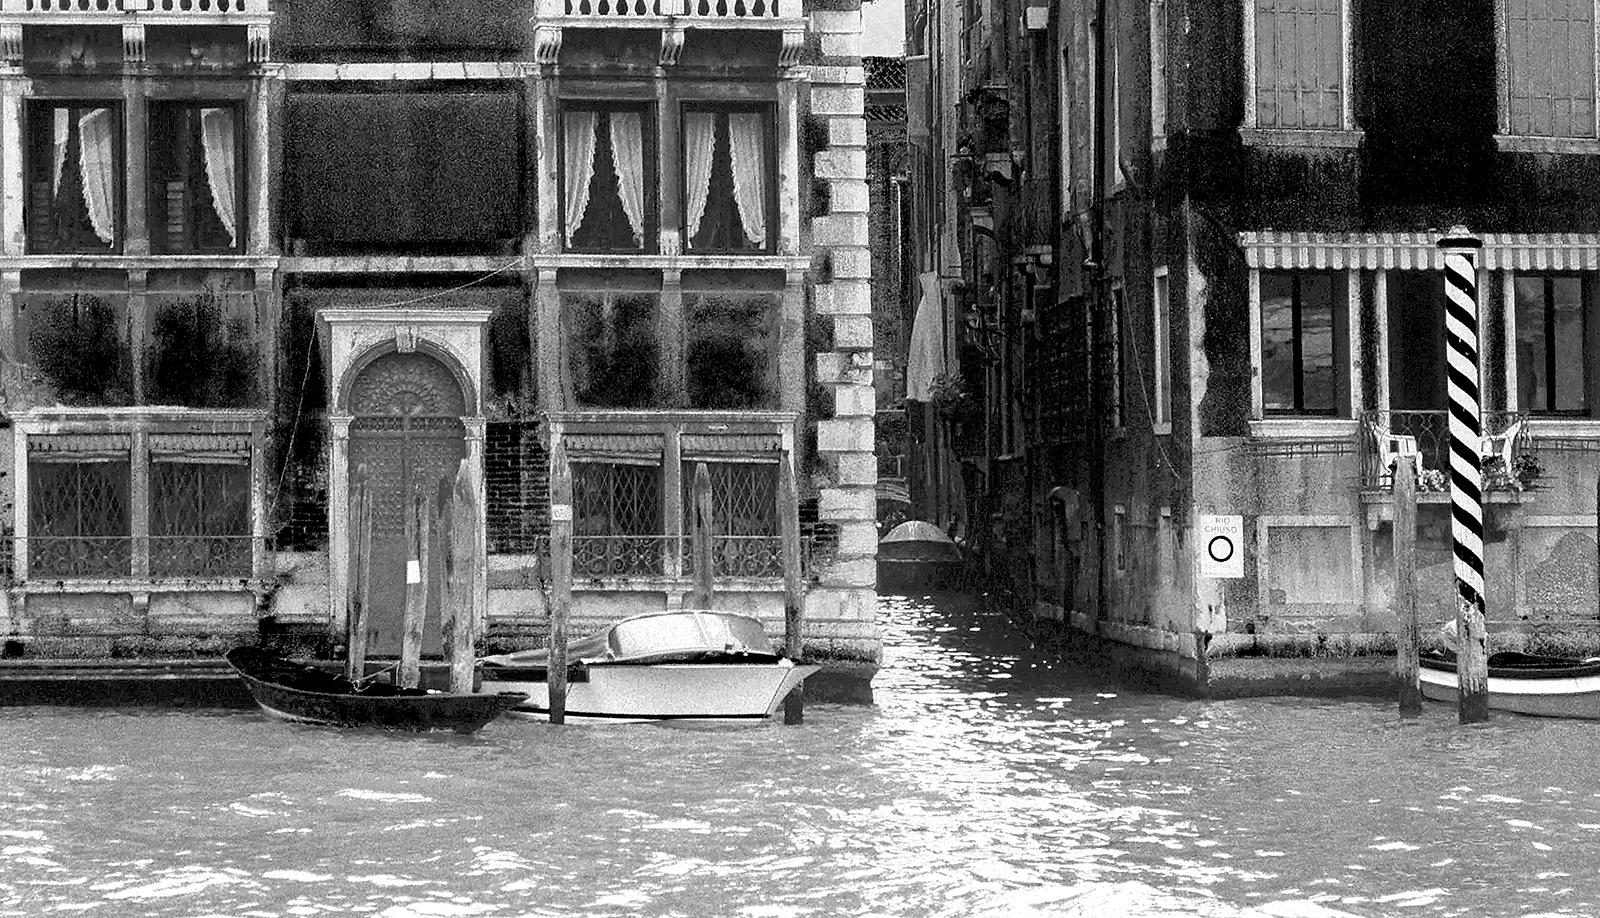 Venice 2 , Limited edition archival pigment print  , 2002   -  Edition of 5. 

This image was captured on film with a camera Xpan Hasselblad . The negative was scanned creating a digital file which was then printed on Hahnemühle Photo Rag® Baryta